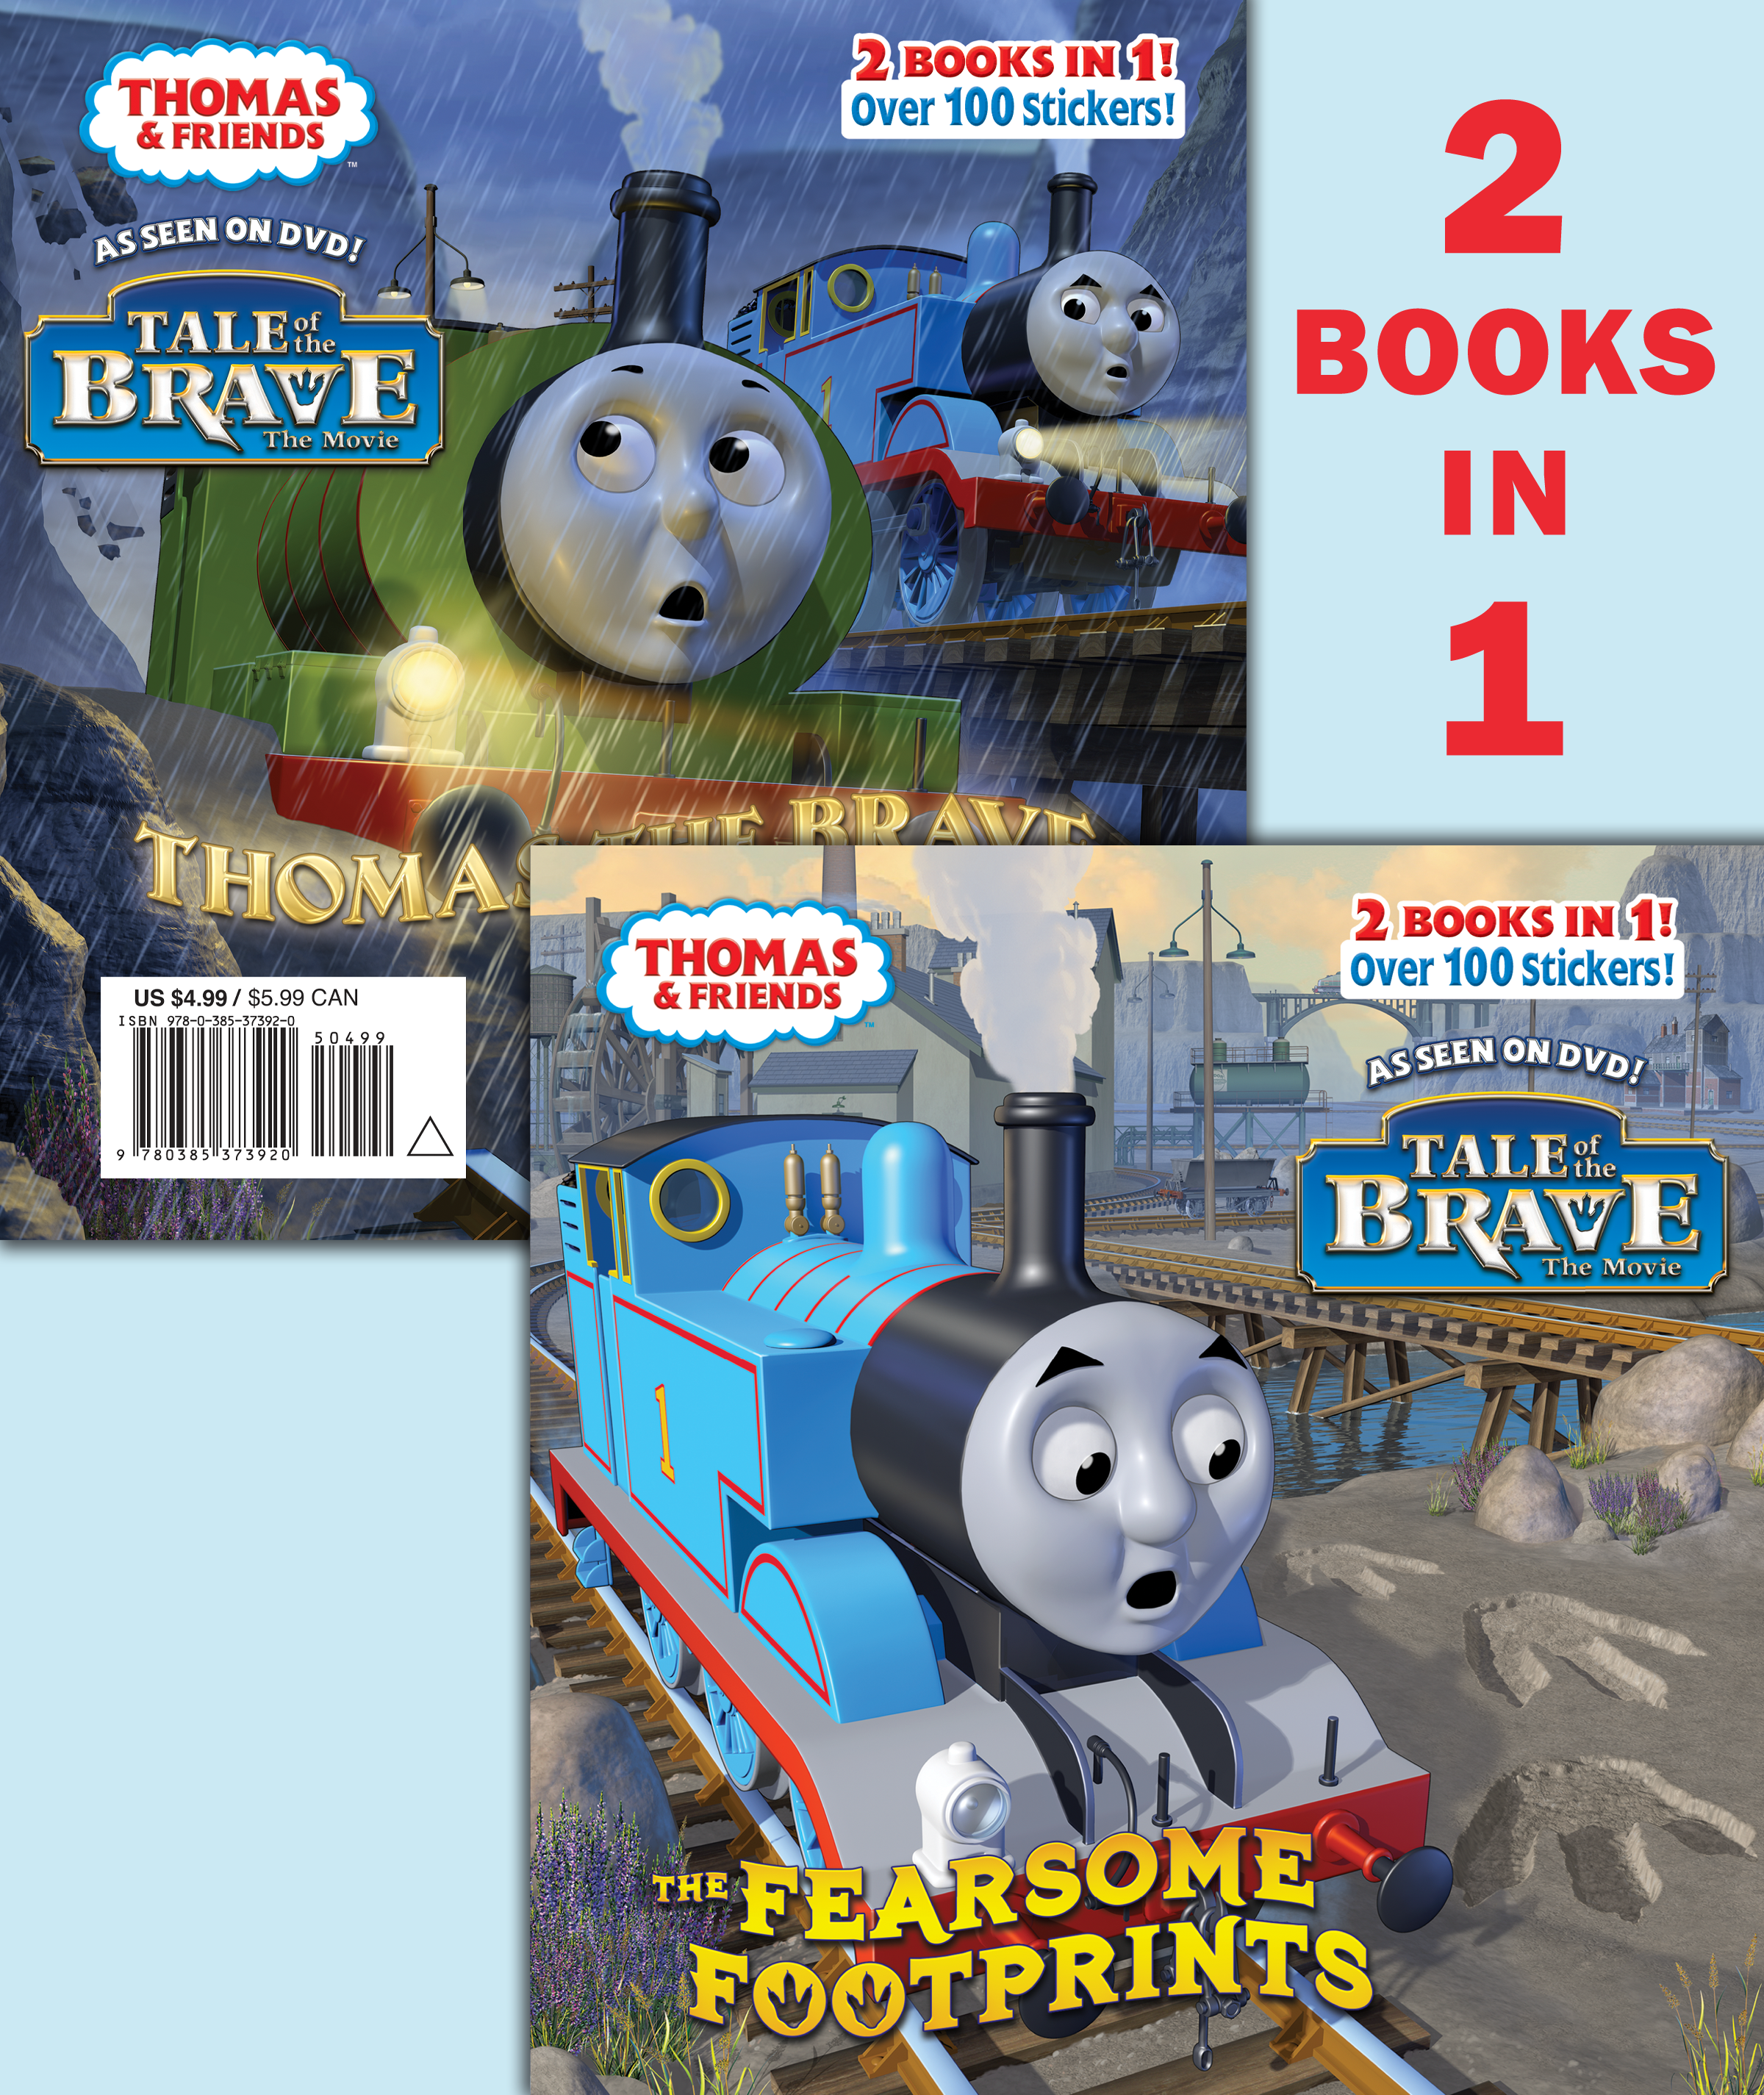 tale of the brave books